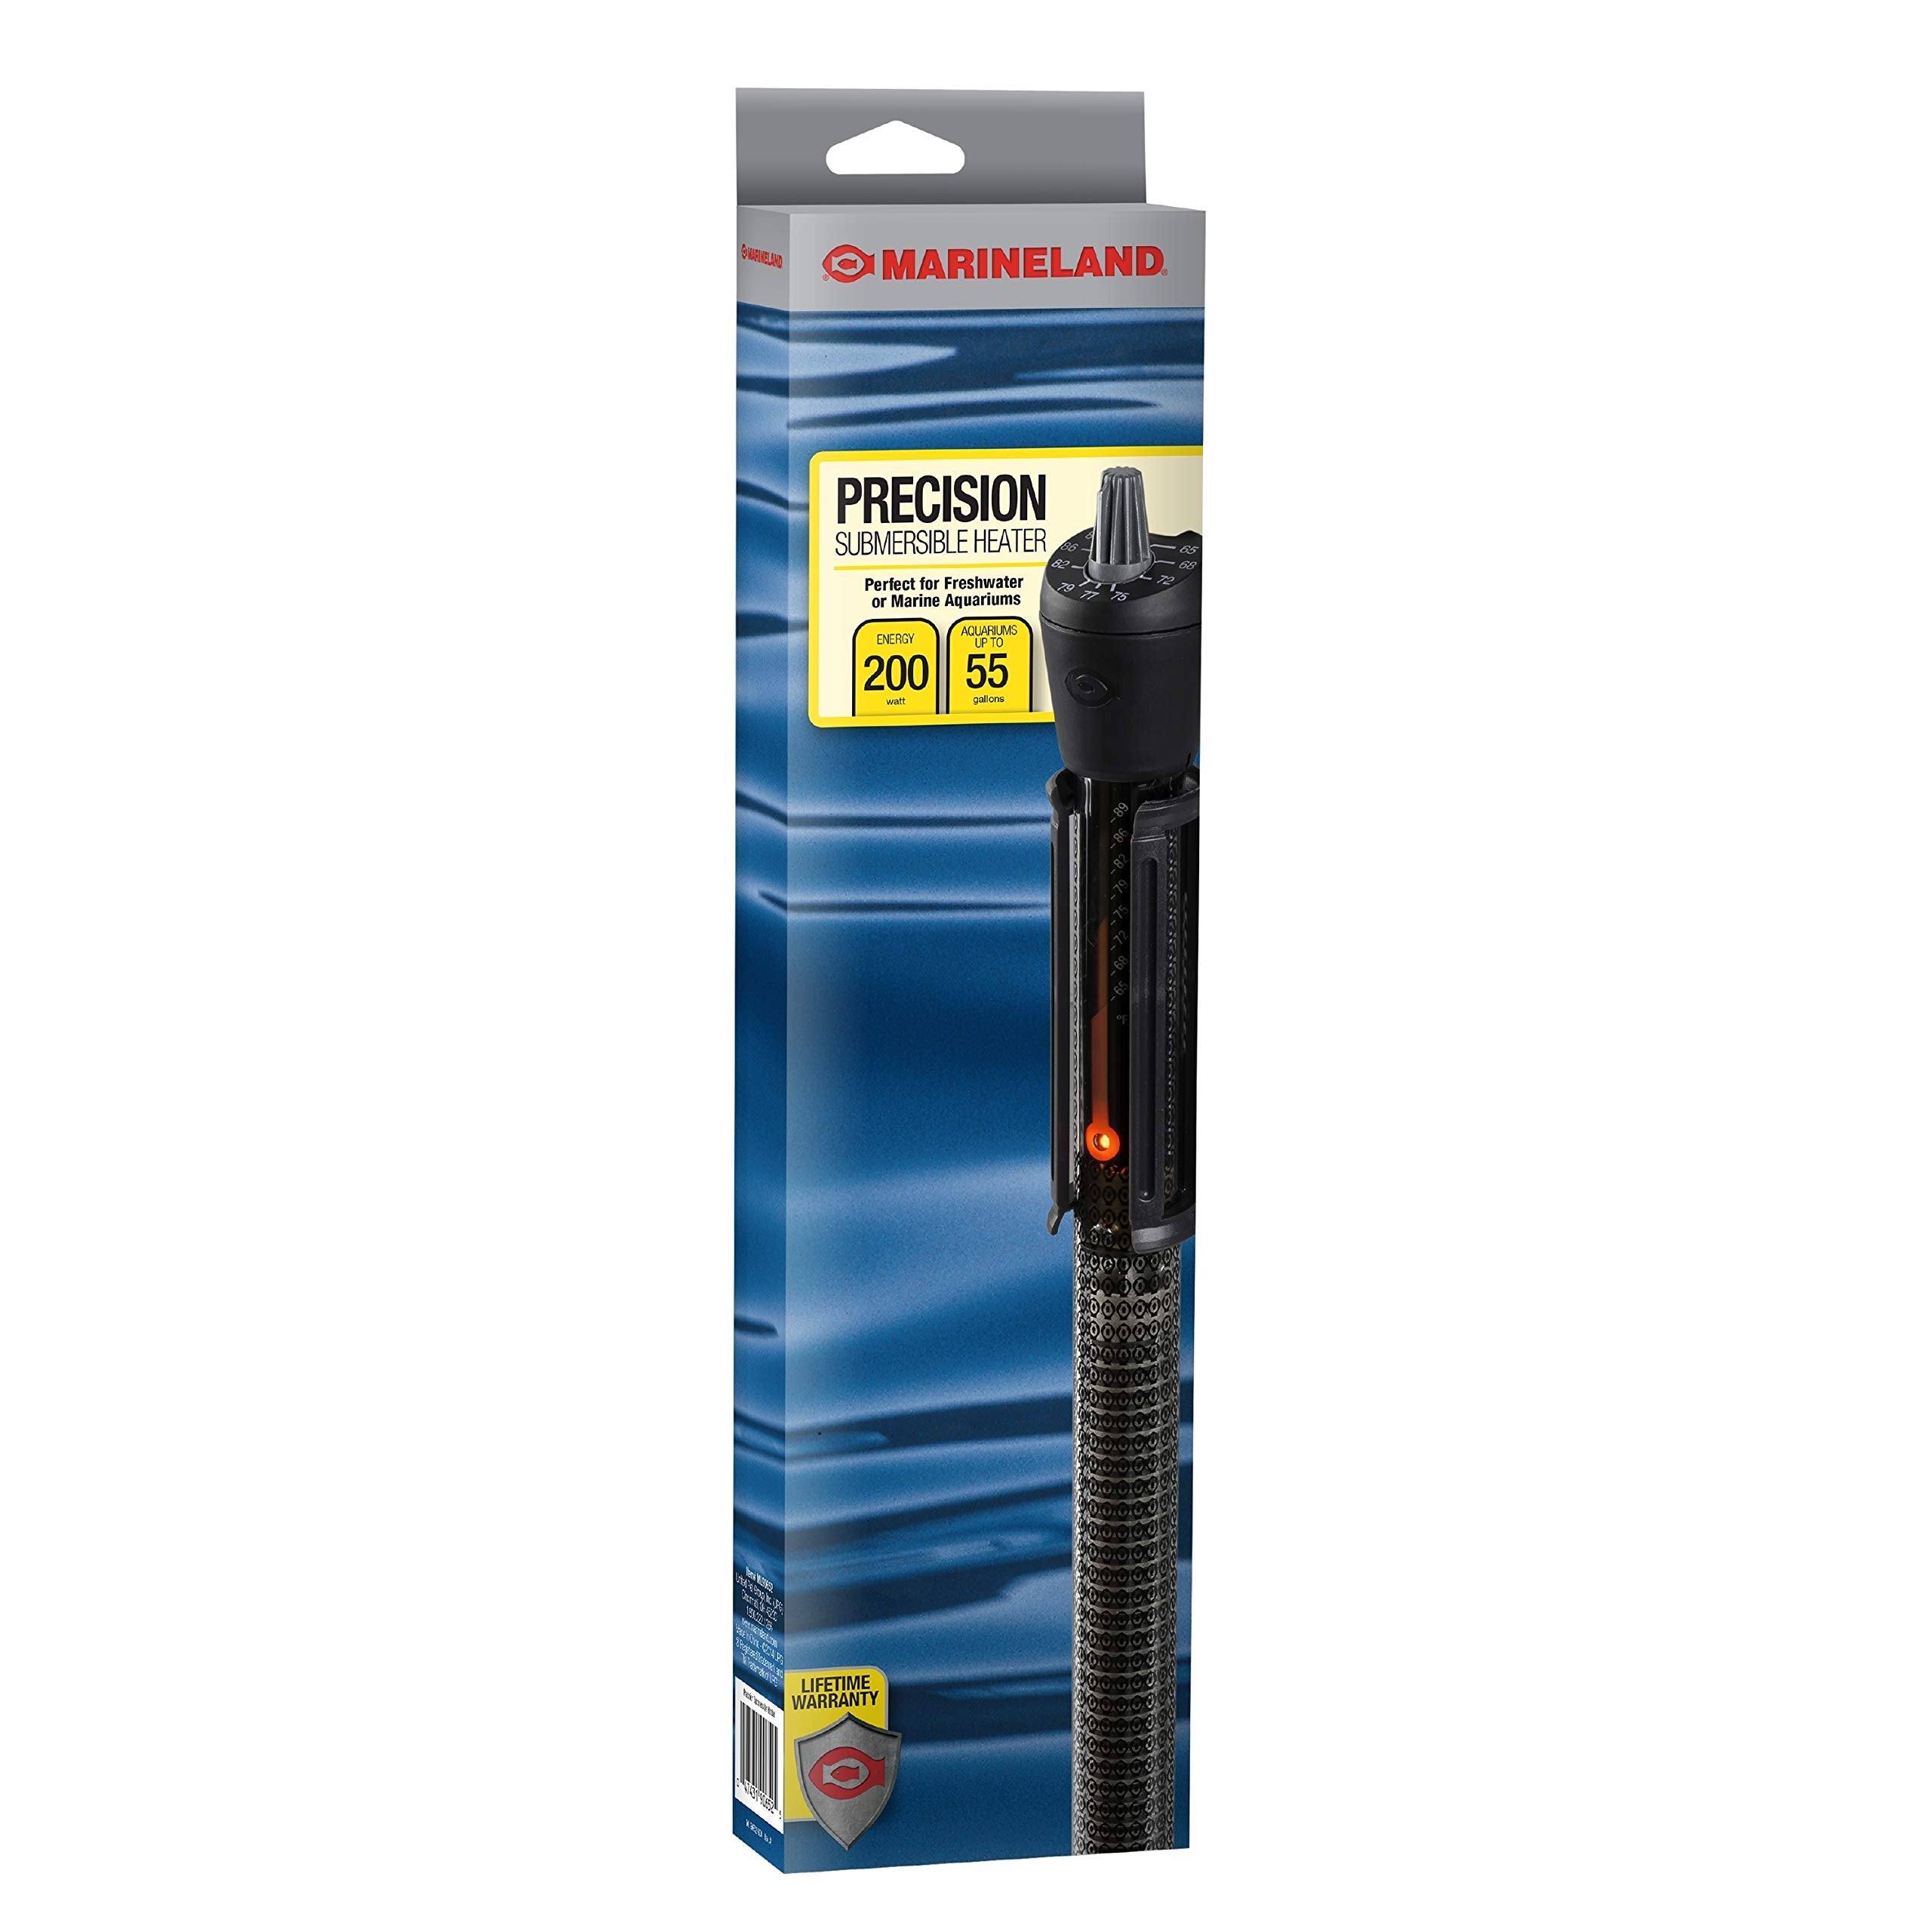 Precision Submersible Heater